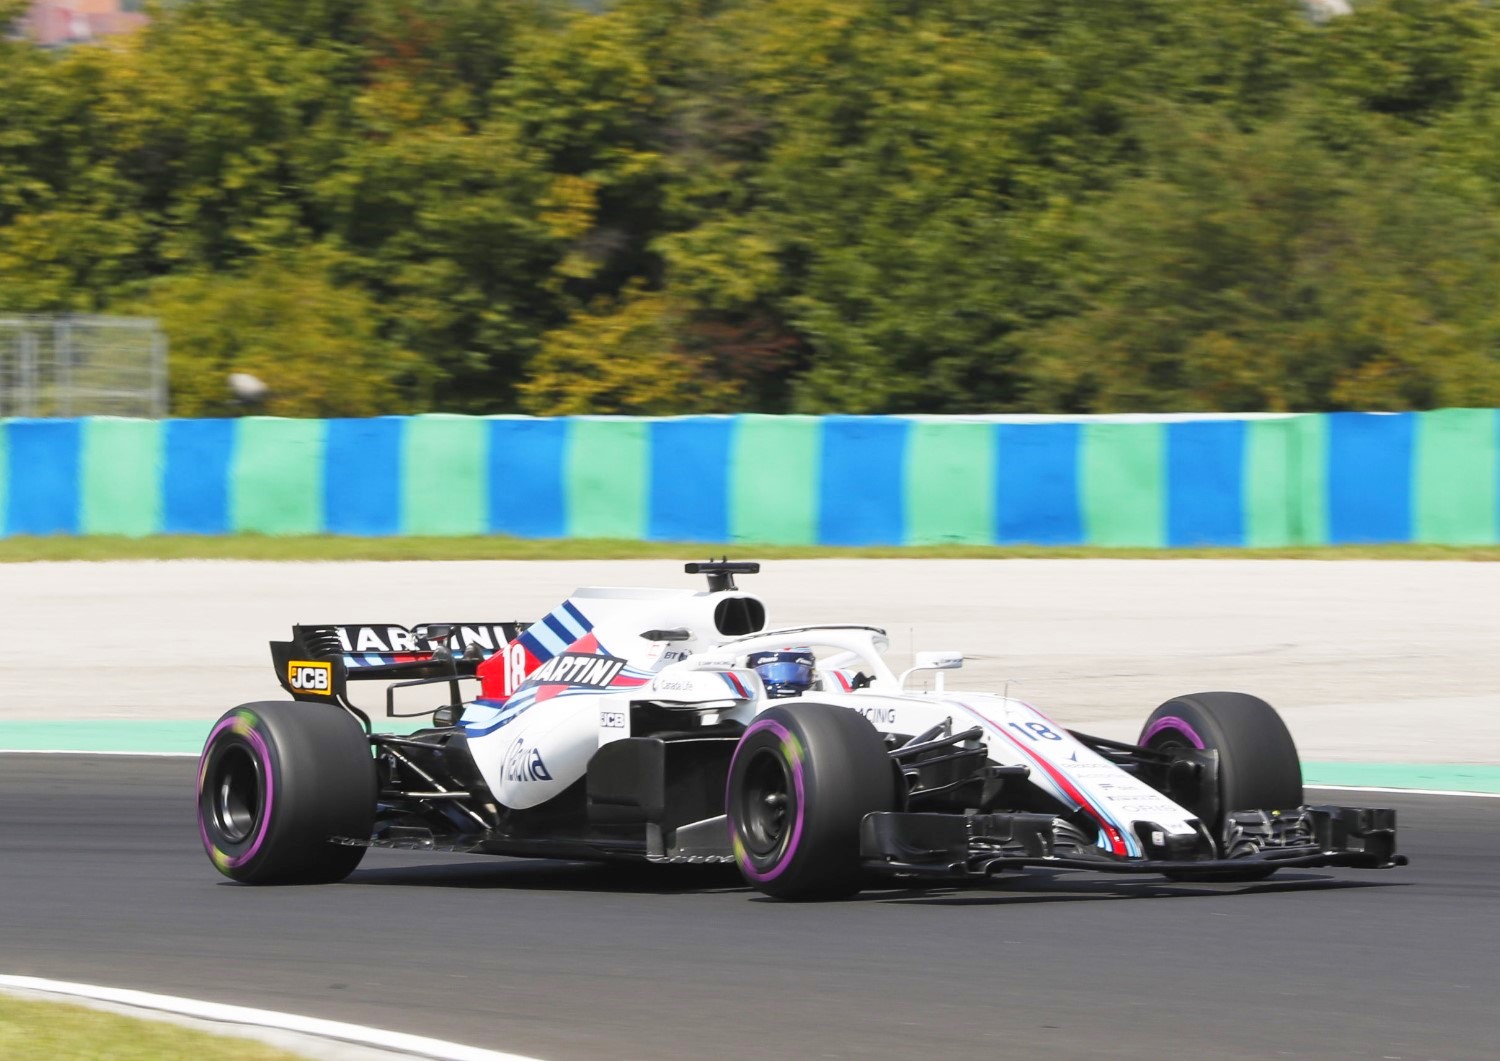 Lance Stroll in the WIlliams